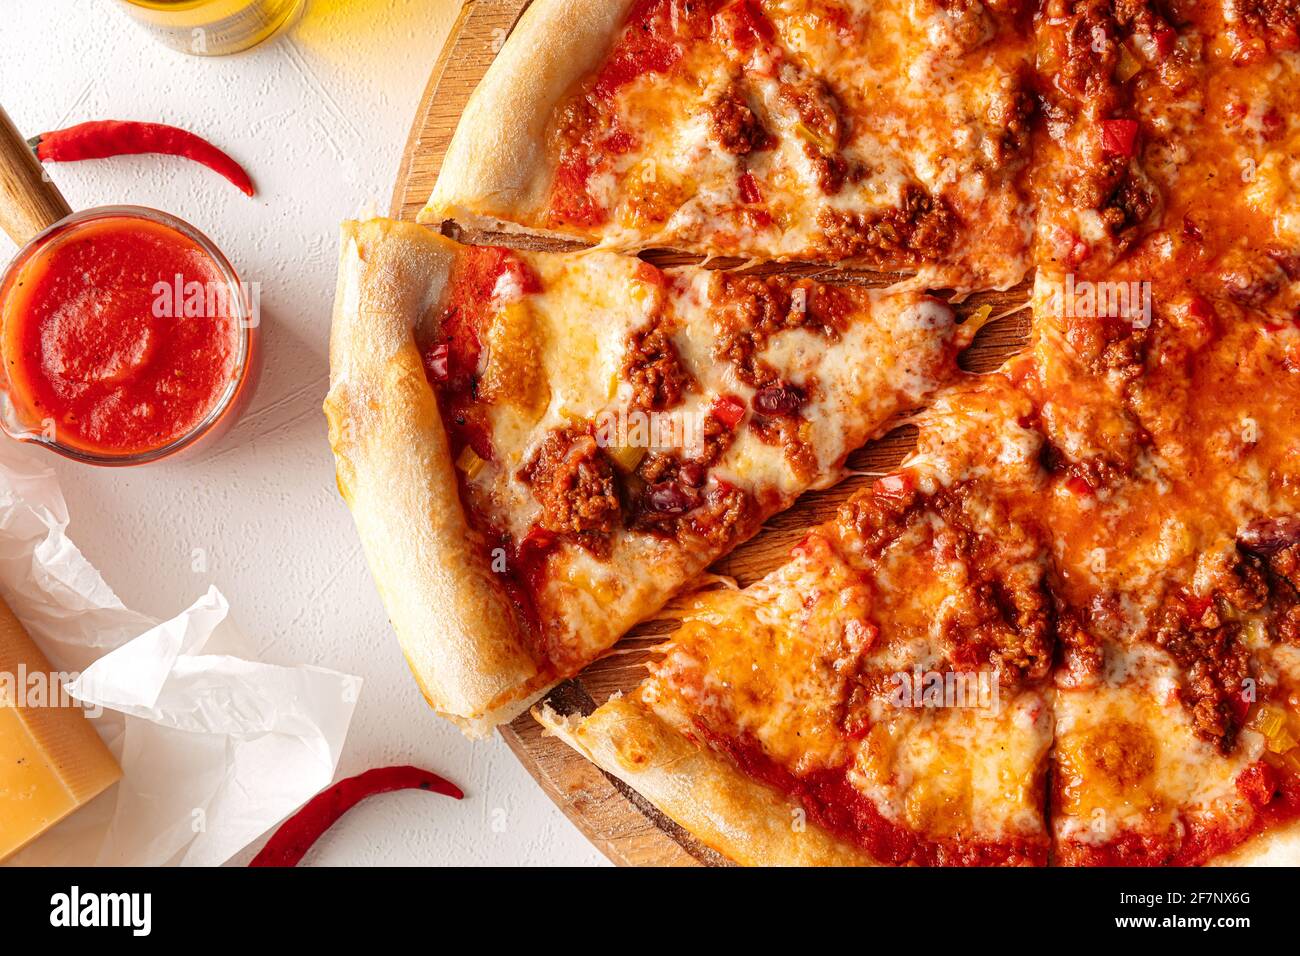 Sliced hot spicy pizza with minced meat Stock Photo